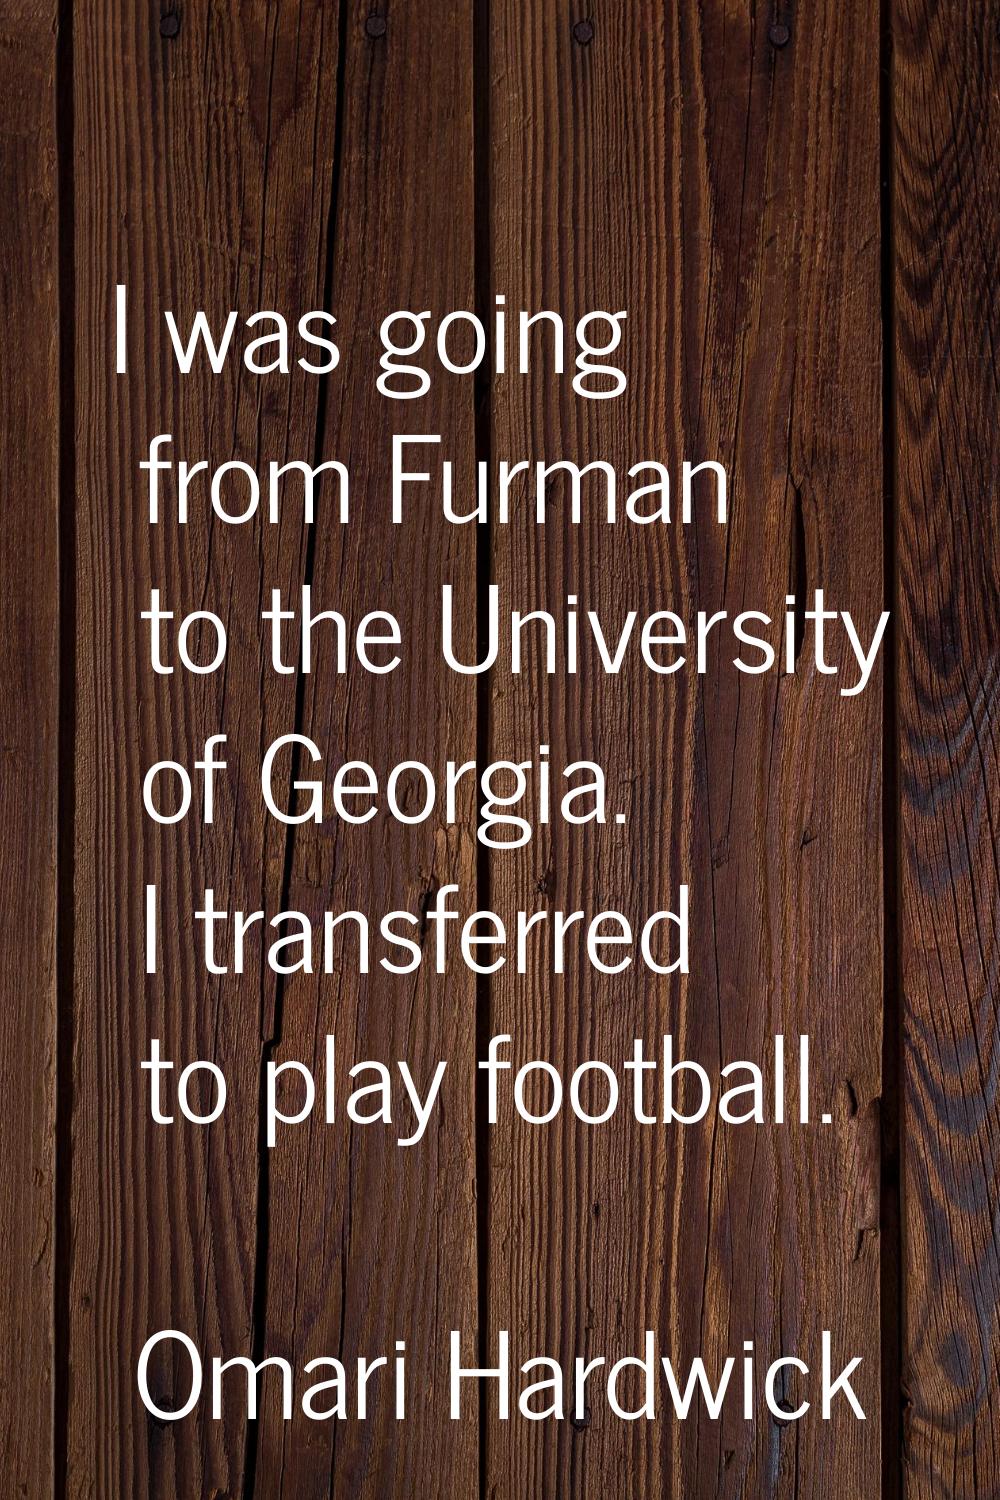 I was going from Furman to the University of Georgia. I transferred to play football.